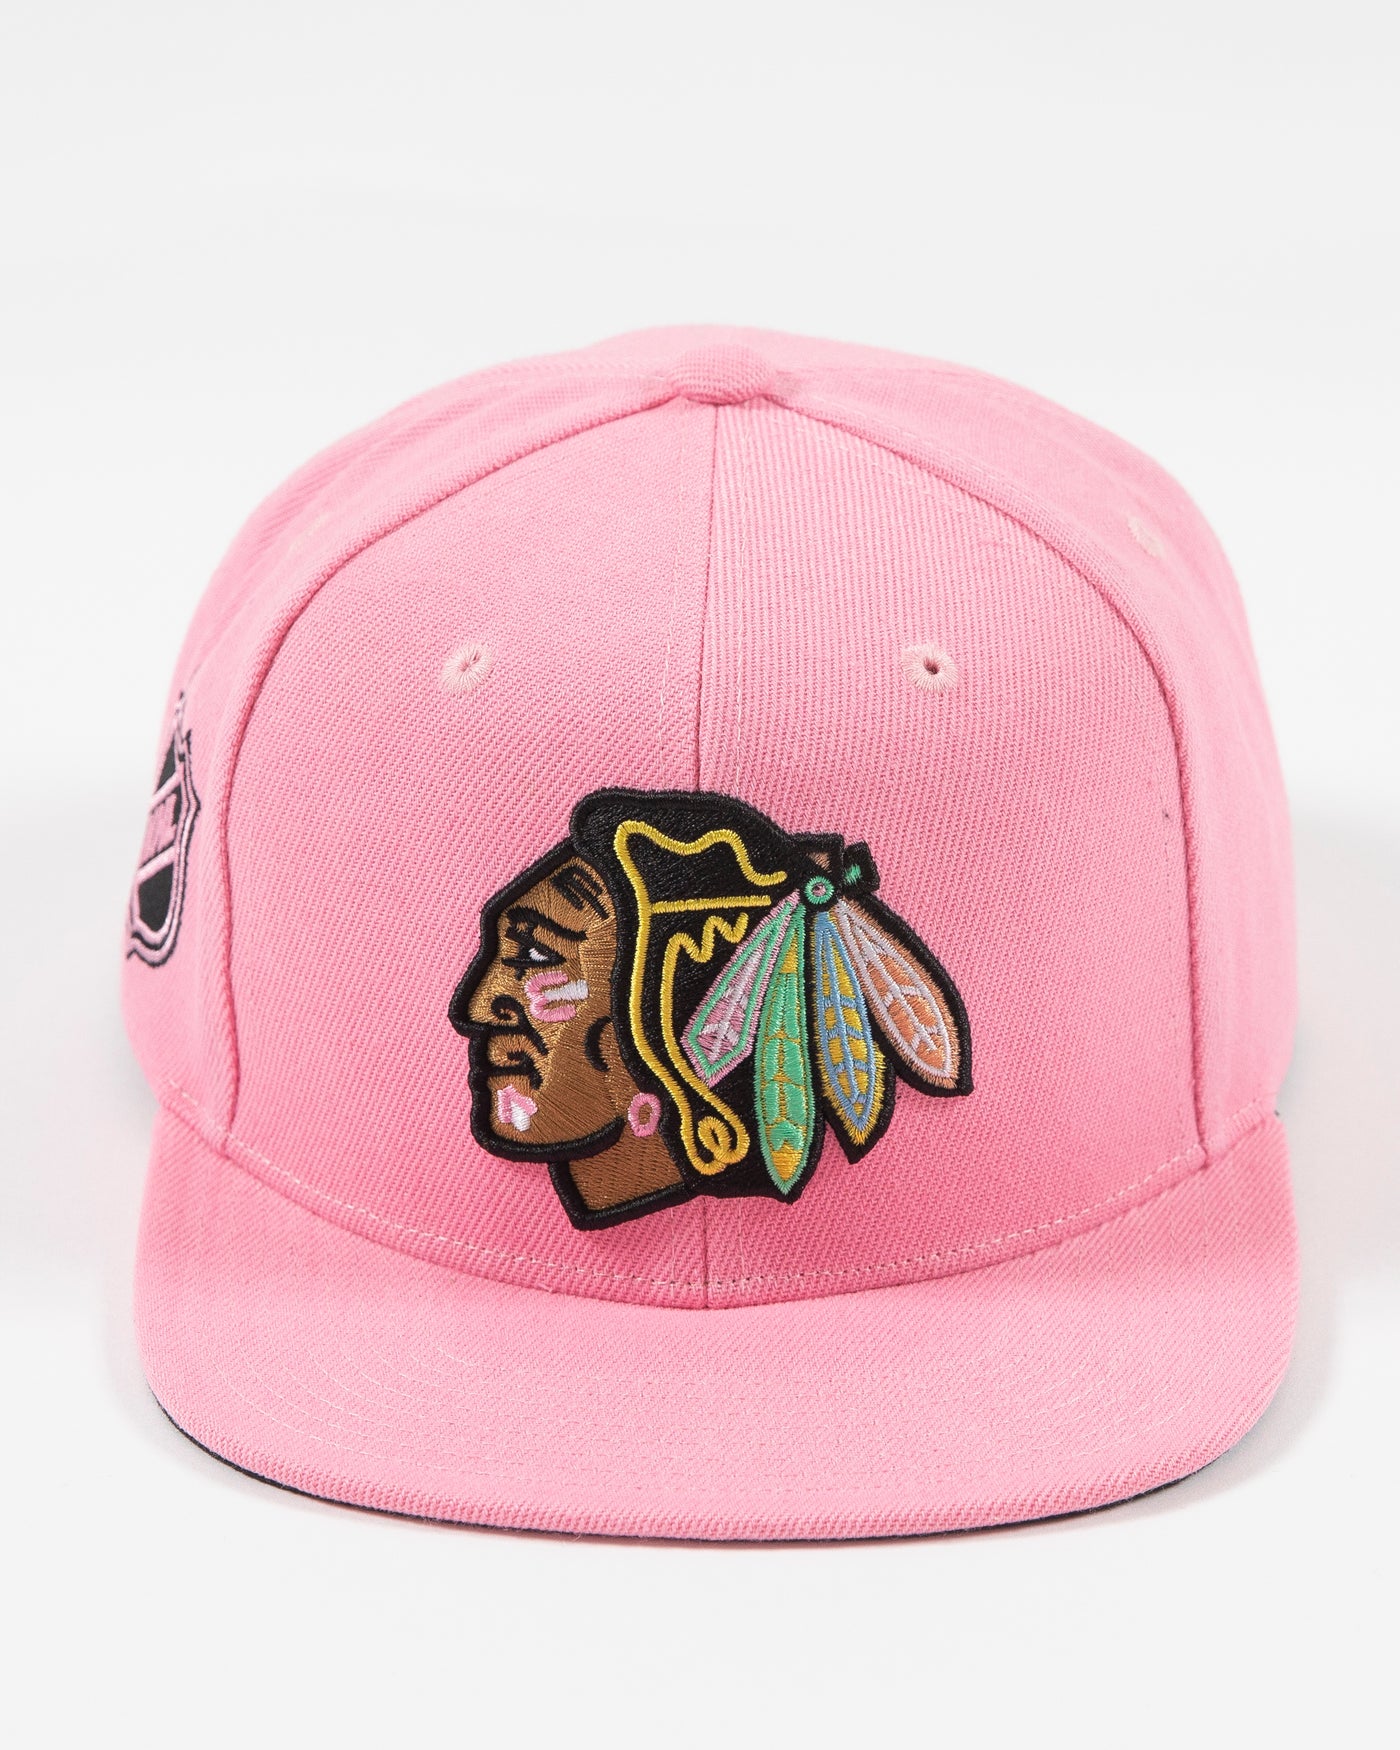 Mitchell & Ness pink snapback with Chicago Blackhawks primary logo embroidered on the front with pink accents - front lay flat